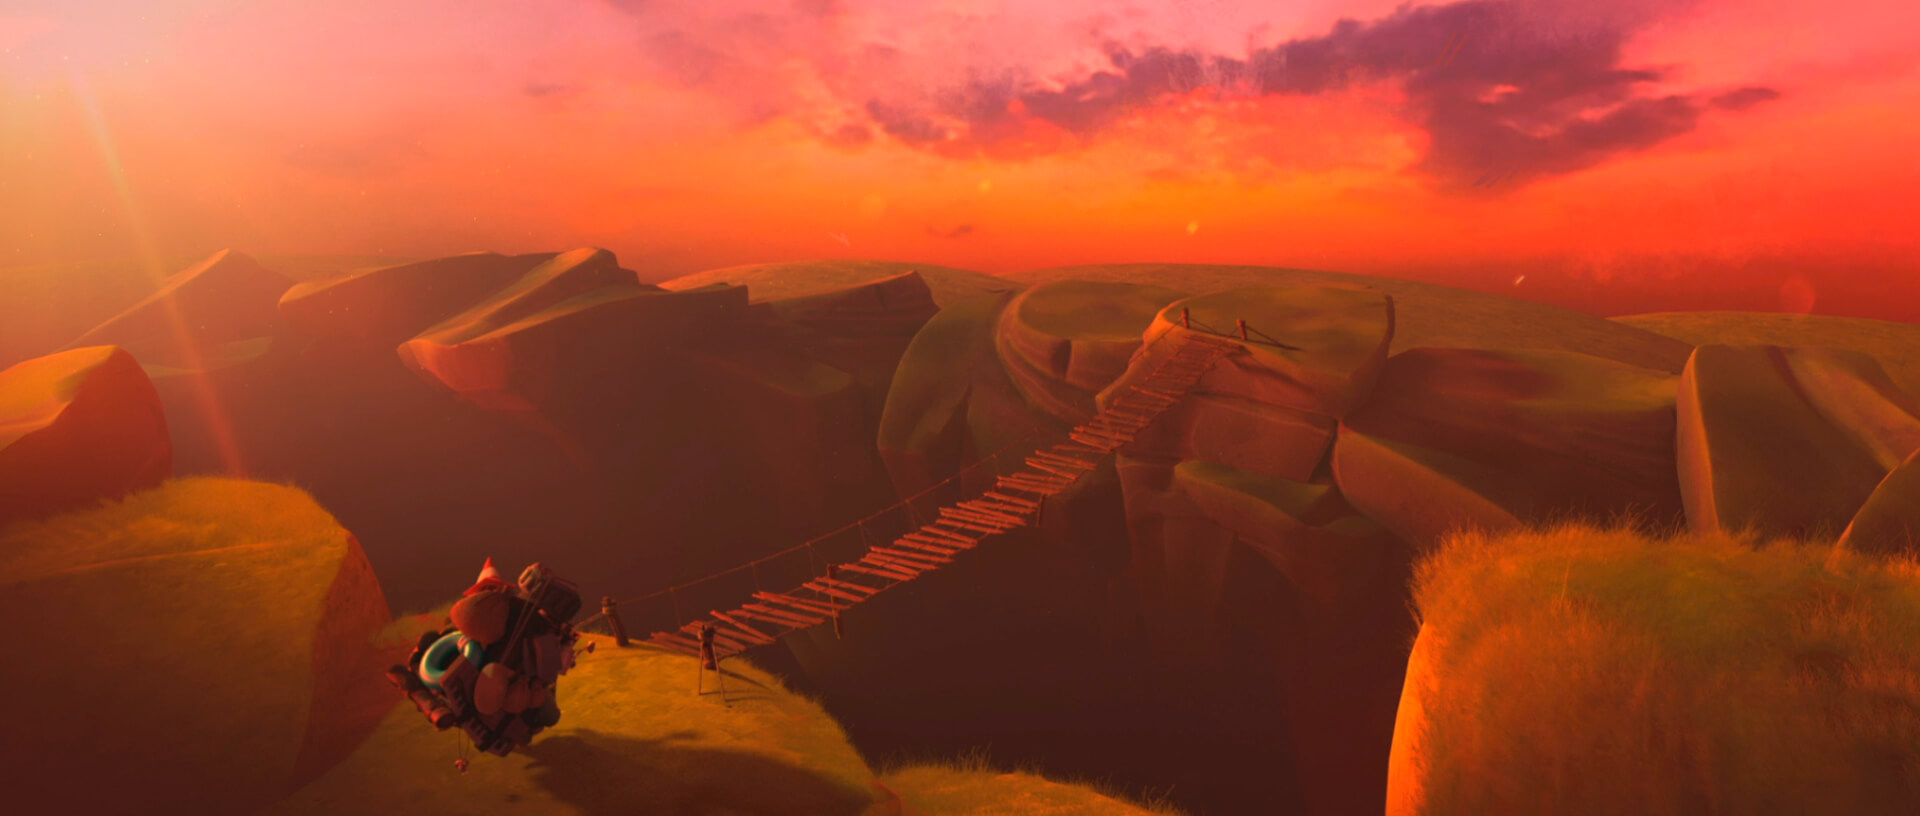 Turtle character on a grassy hill, looking at a bridge over a chasm, with a pink and orange sky.